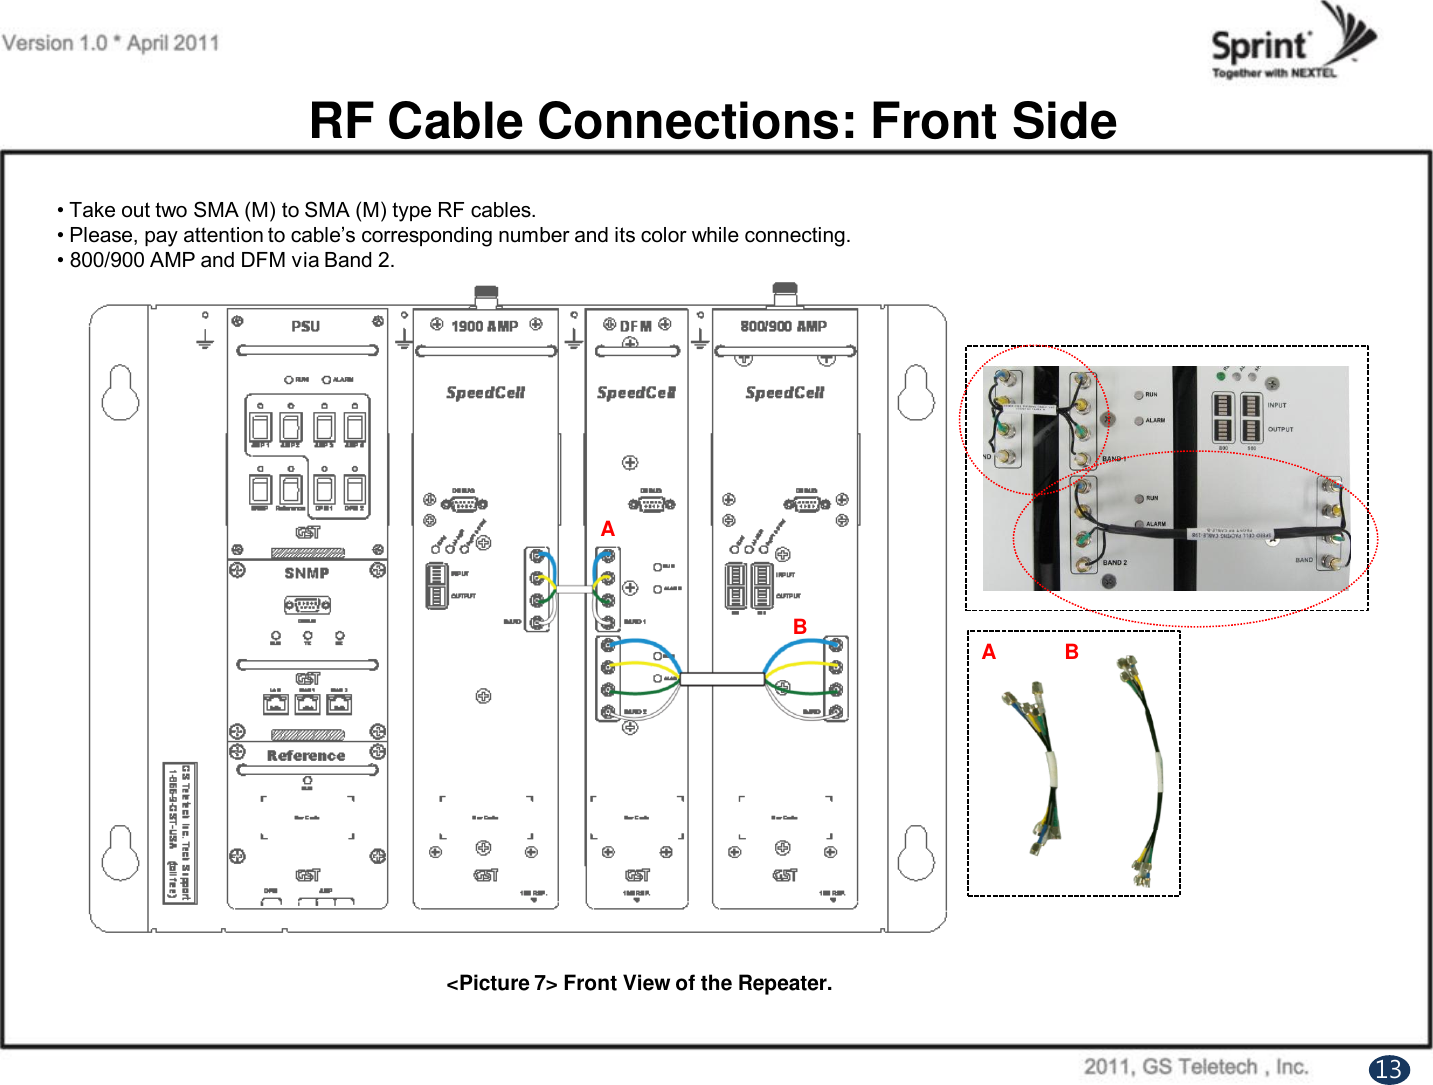 RF Cable Connections: Front SideAB• Take out two SMA (M) to SMA (M) type RF cables.• Please, pay attention to cable‟s corresponding number and its color while connecting.• 800/900 AMP and DFM via Band 2.&lt;Picture 7&gt; Front View of the Repeater.13A B